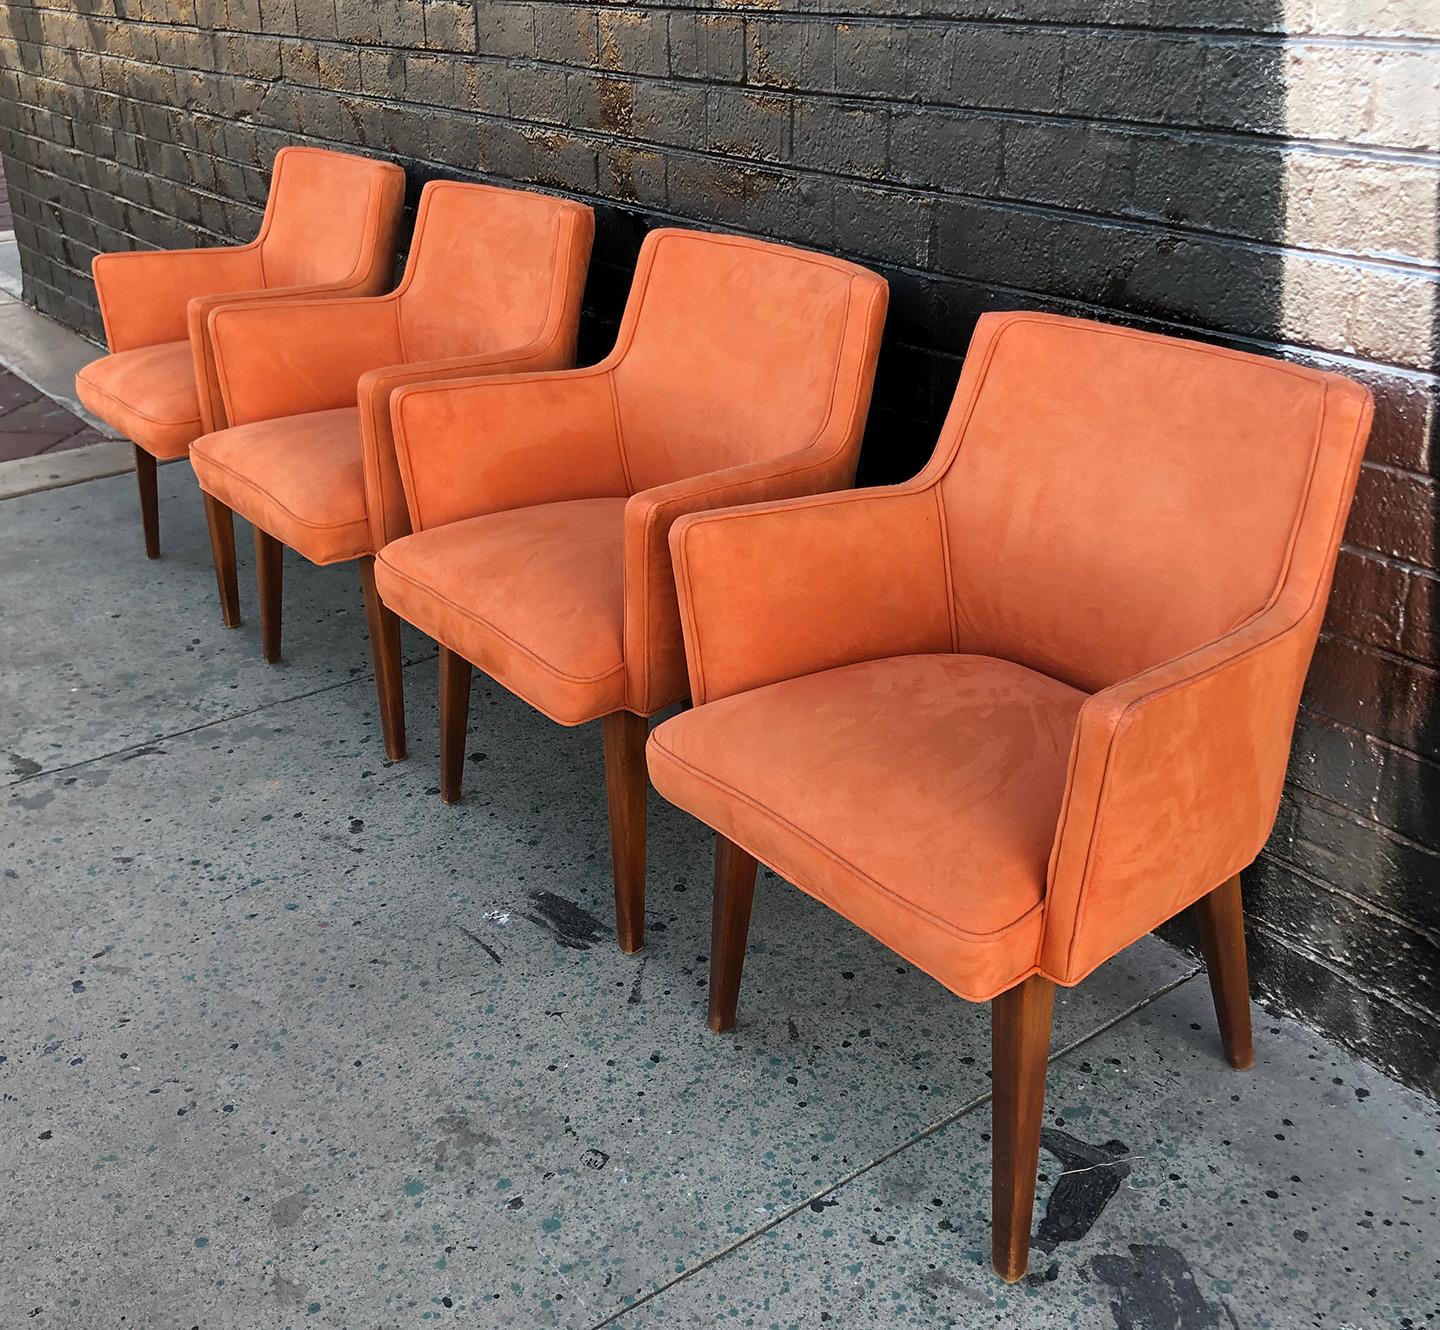 Available right now we have a gorgeous set of 4 Mid-Century Modern dining chairs upholstered in an orange microsuede type material. These cute mid mod chairs have a very Paul McCobb meets Saarinen feel and are in great condition with minimal wear